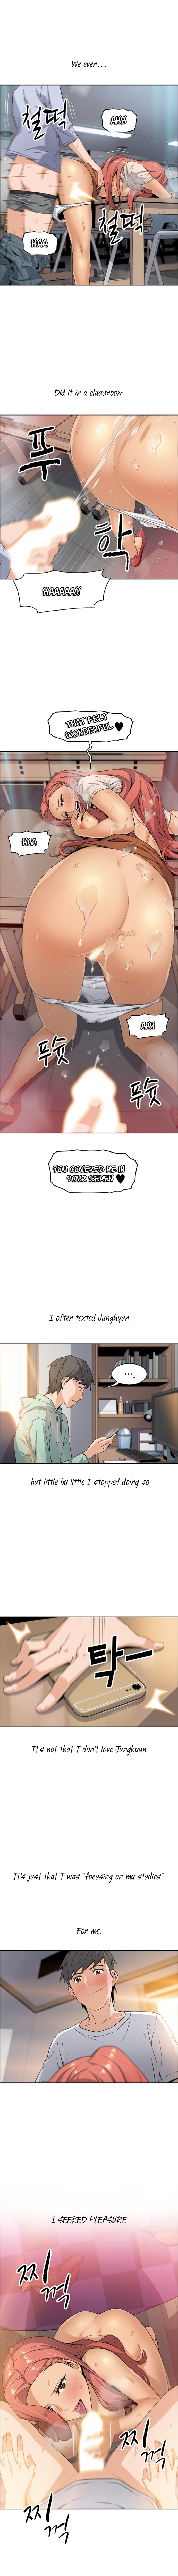 Housekeeper Manhwa - Chapter 3 Page 10